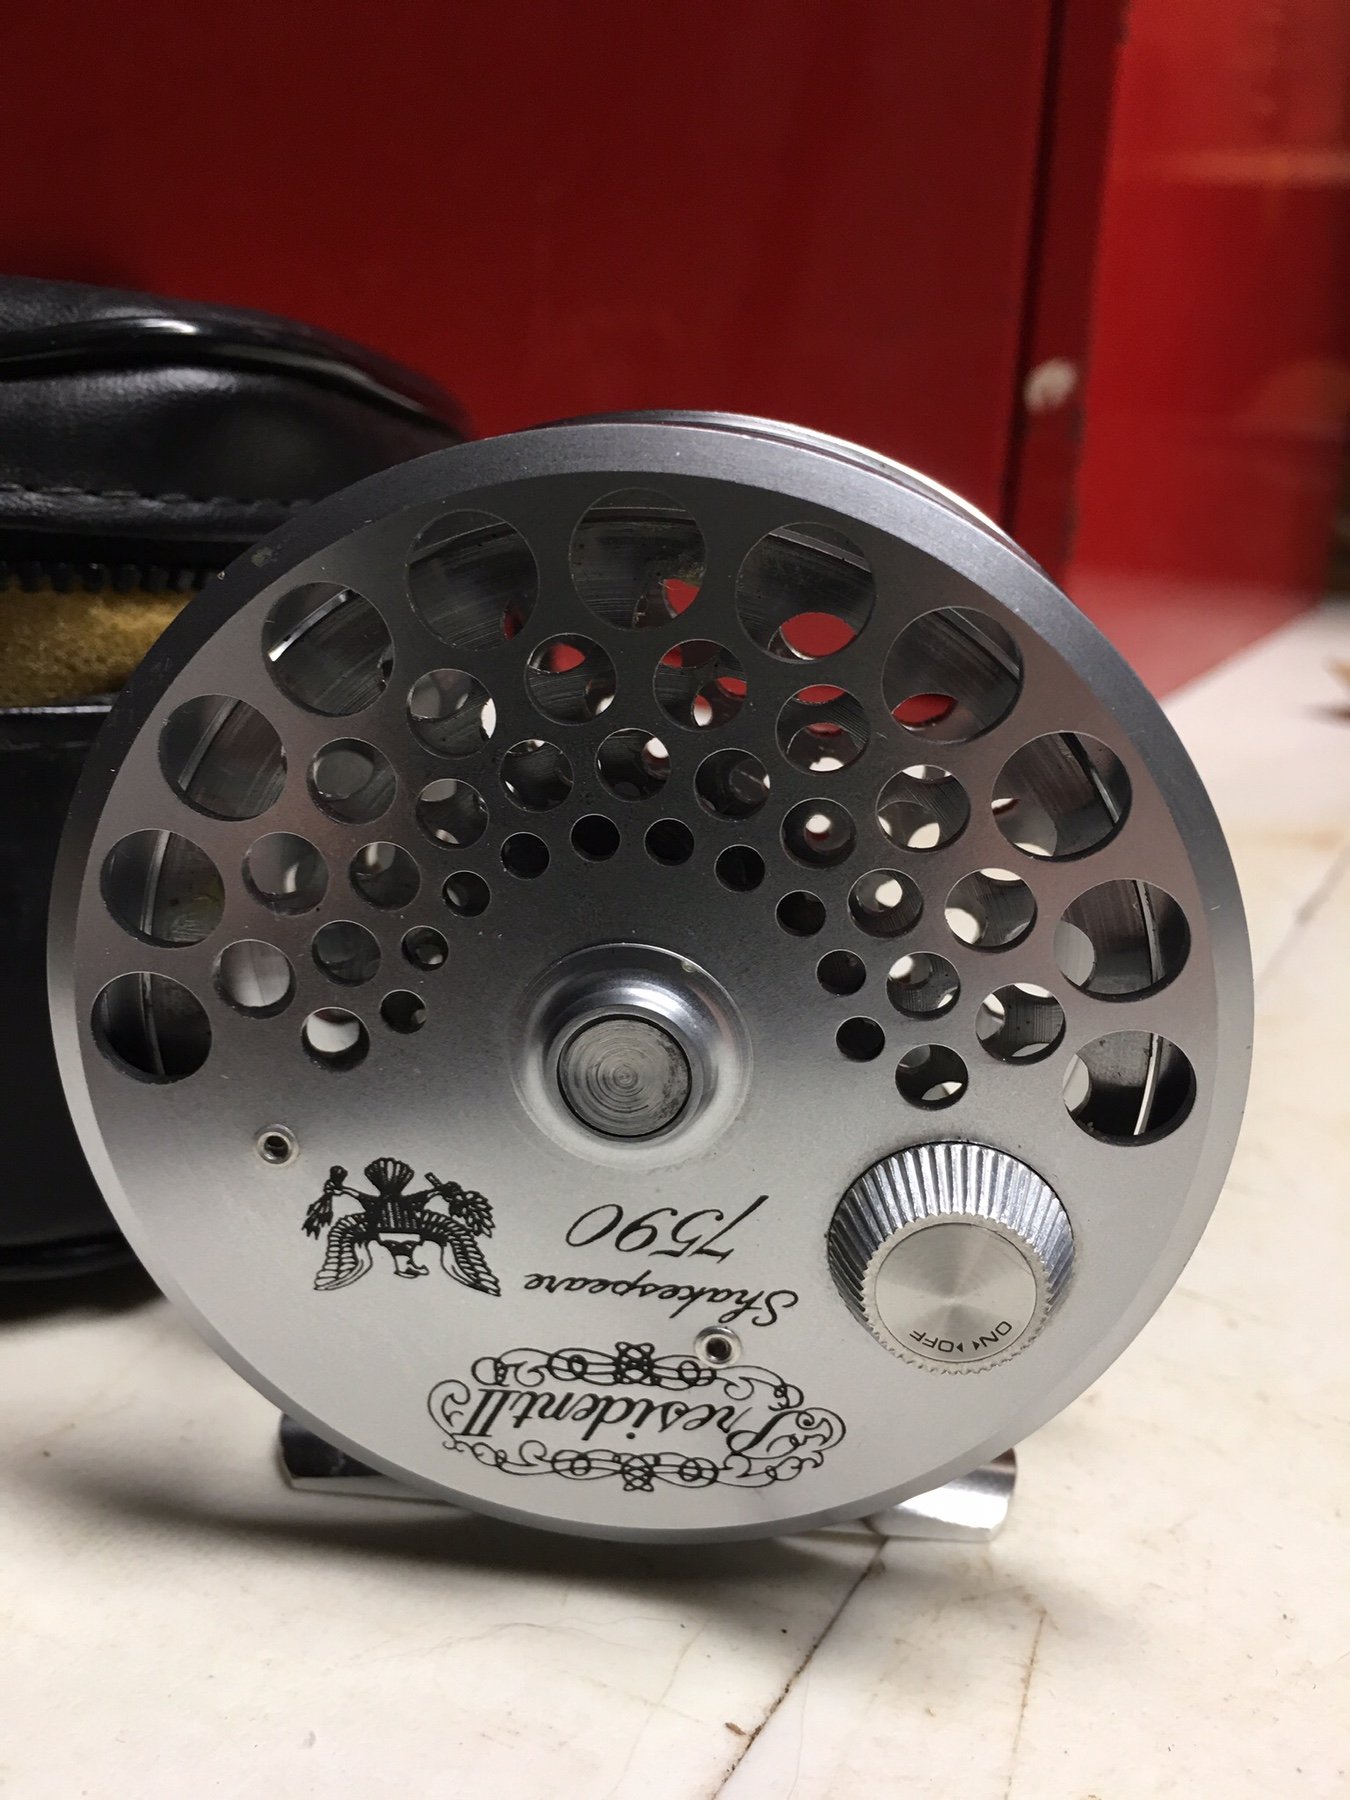 The Shakespeare magnesium fly reels - The Classic Fly Rod Forum